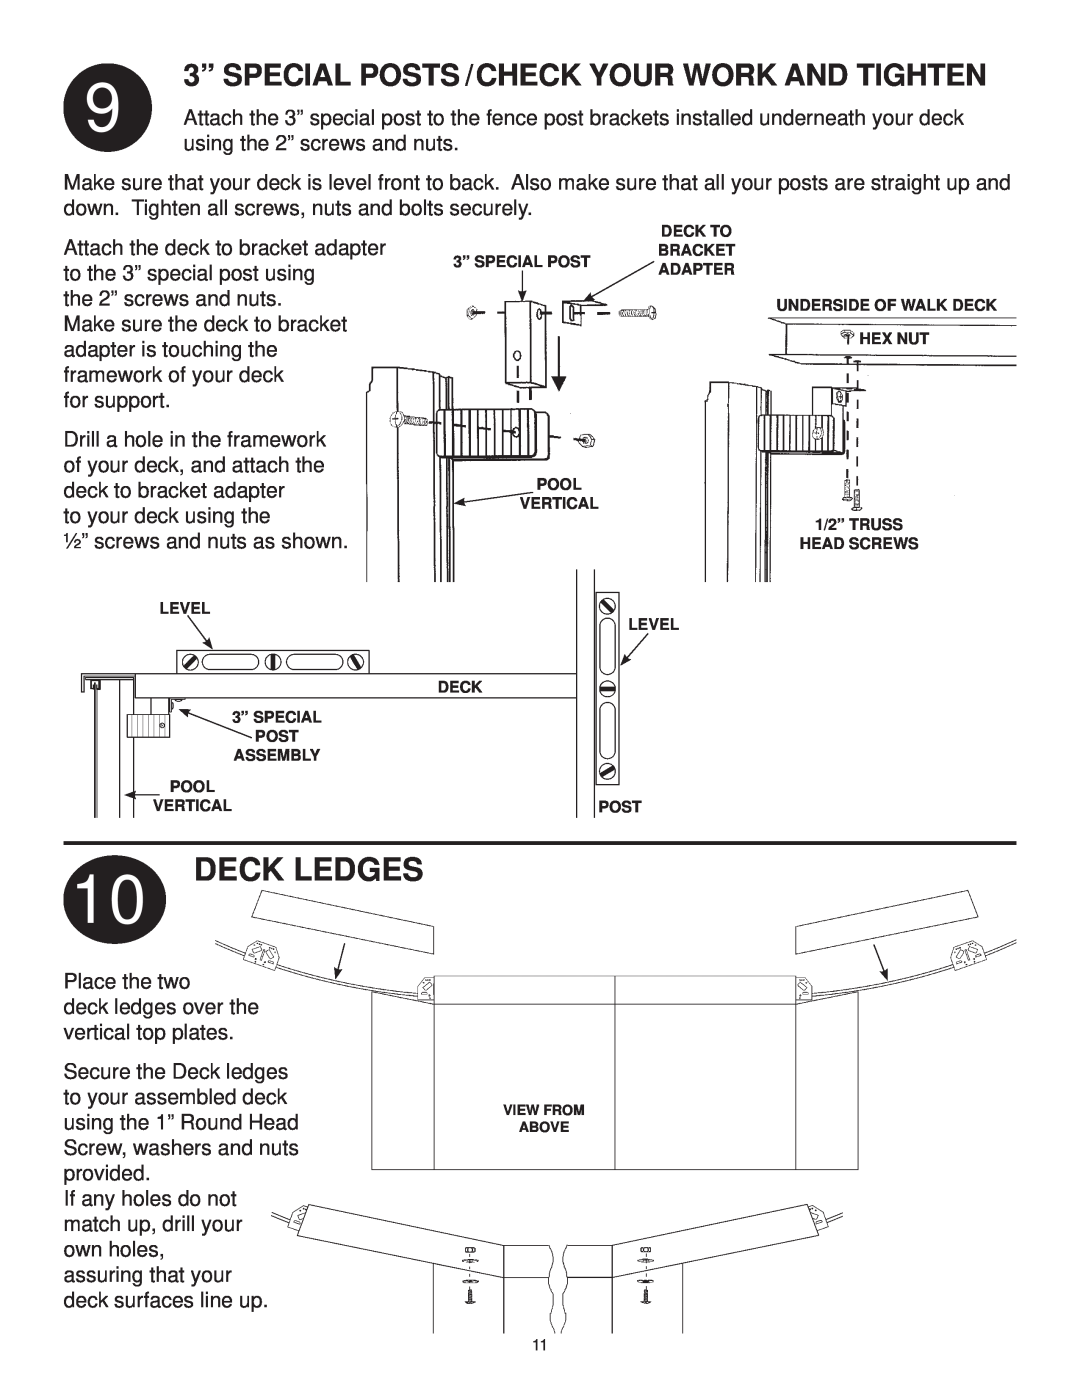 Swim'n Play side deck manual Deck Ledges, 9 3” SPECIAL POSTS /CHECK YOUR WORK AND TIGHTEN 